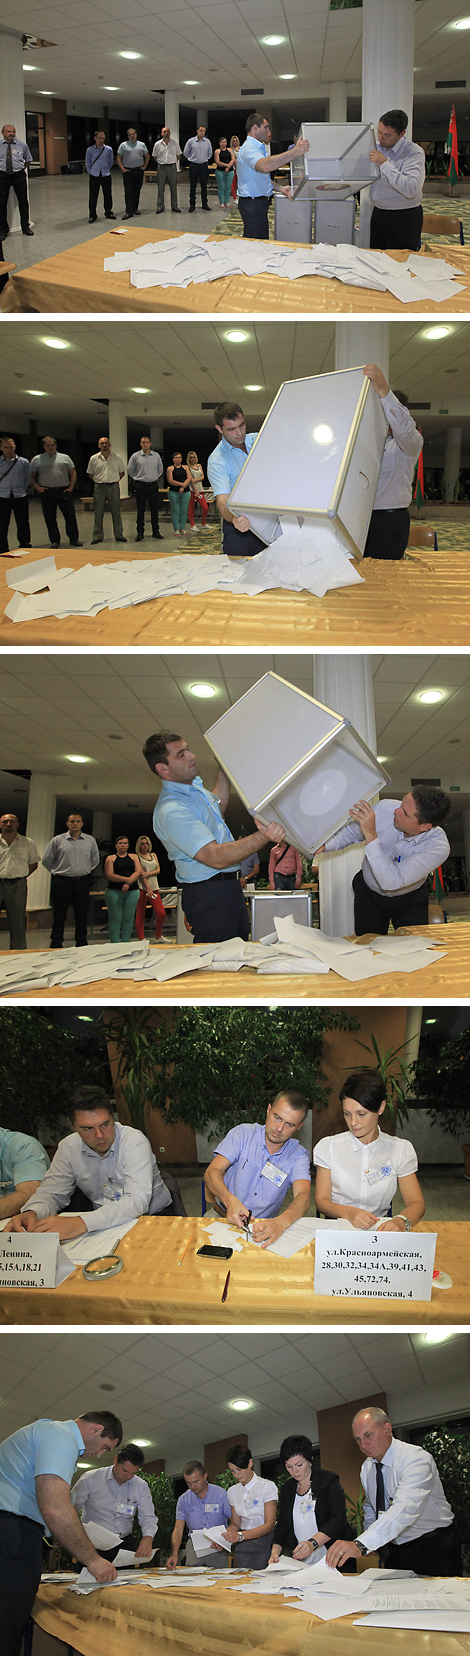 Counting of votes in Minsk 